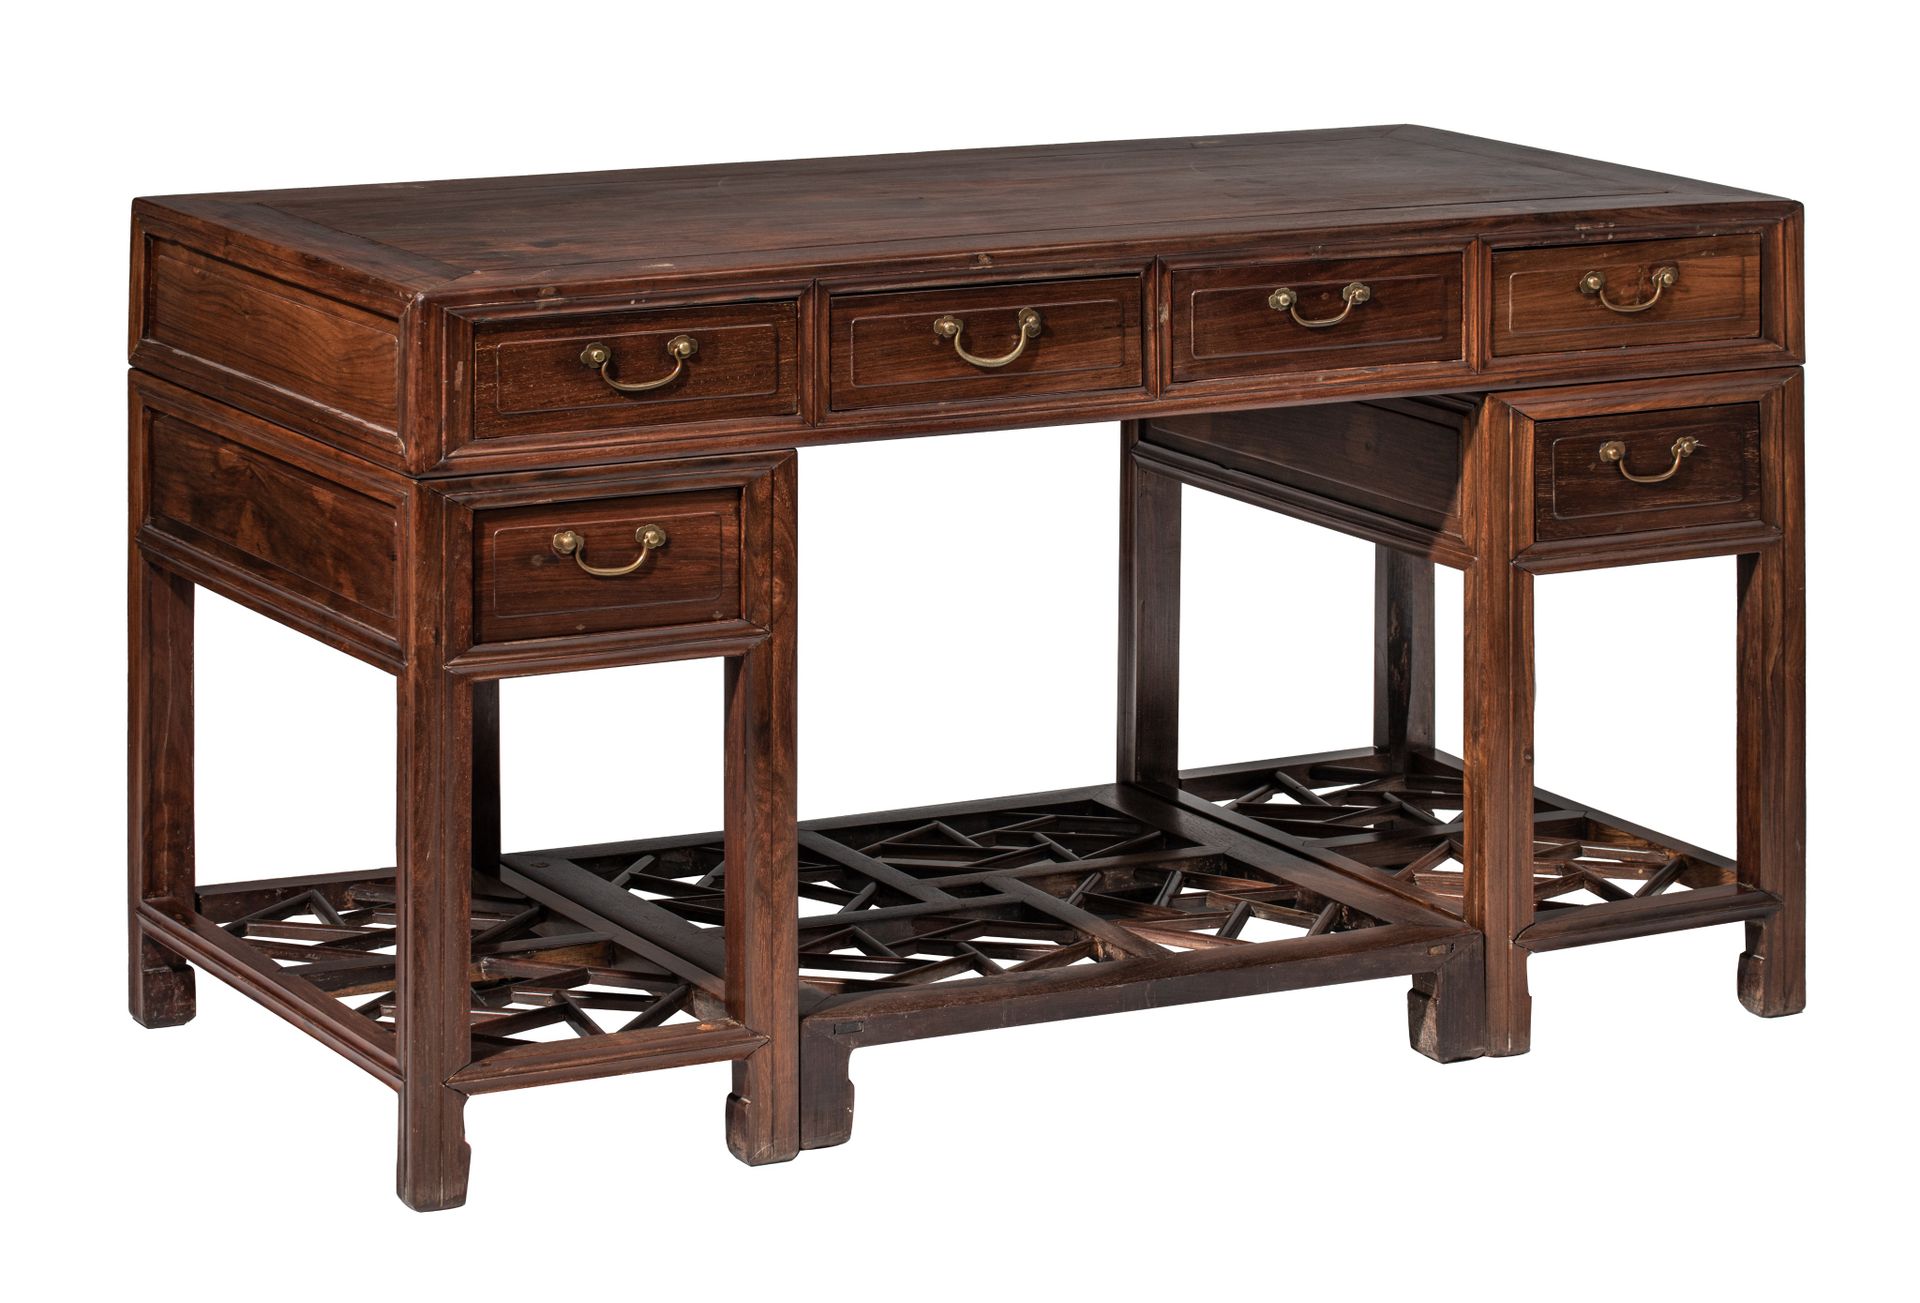 A Chinese hardwood desk, 20thC, H 83 - 144 x 72 cm A Chinese hardwood desk, 20th&hellip;